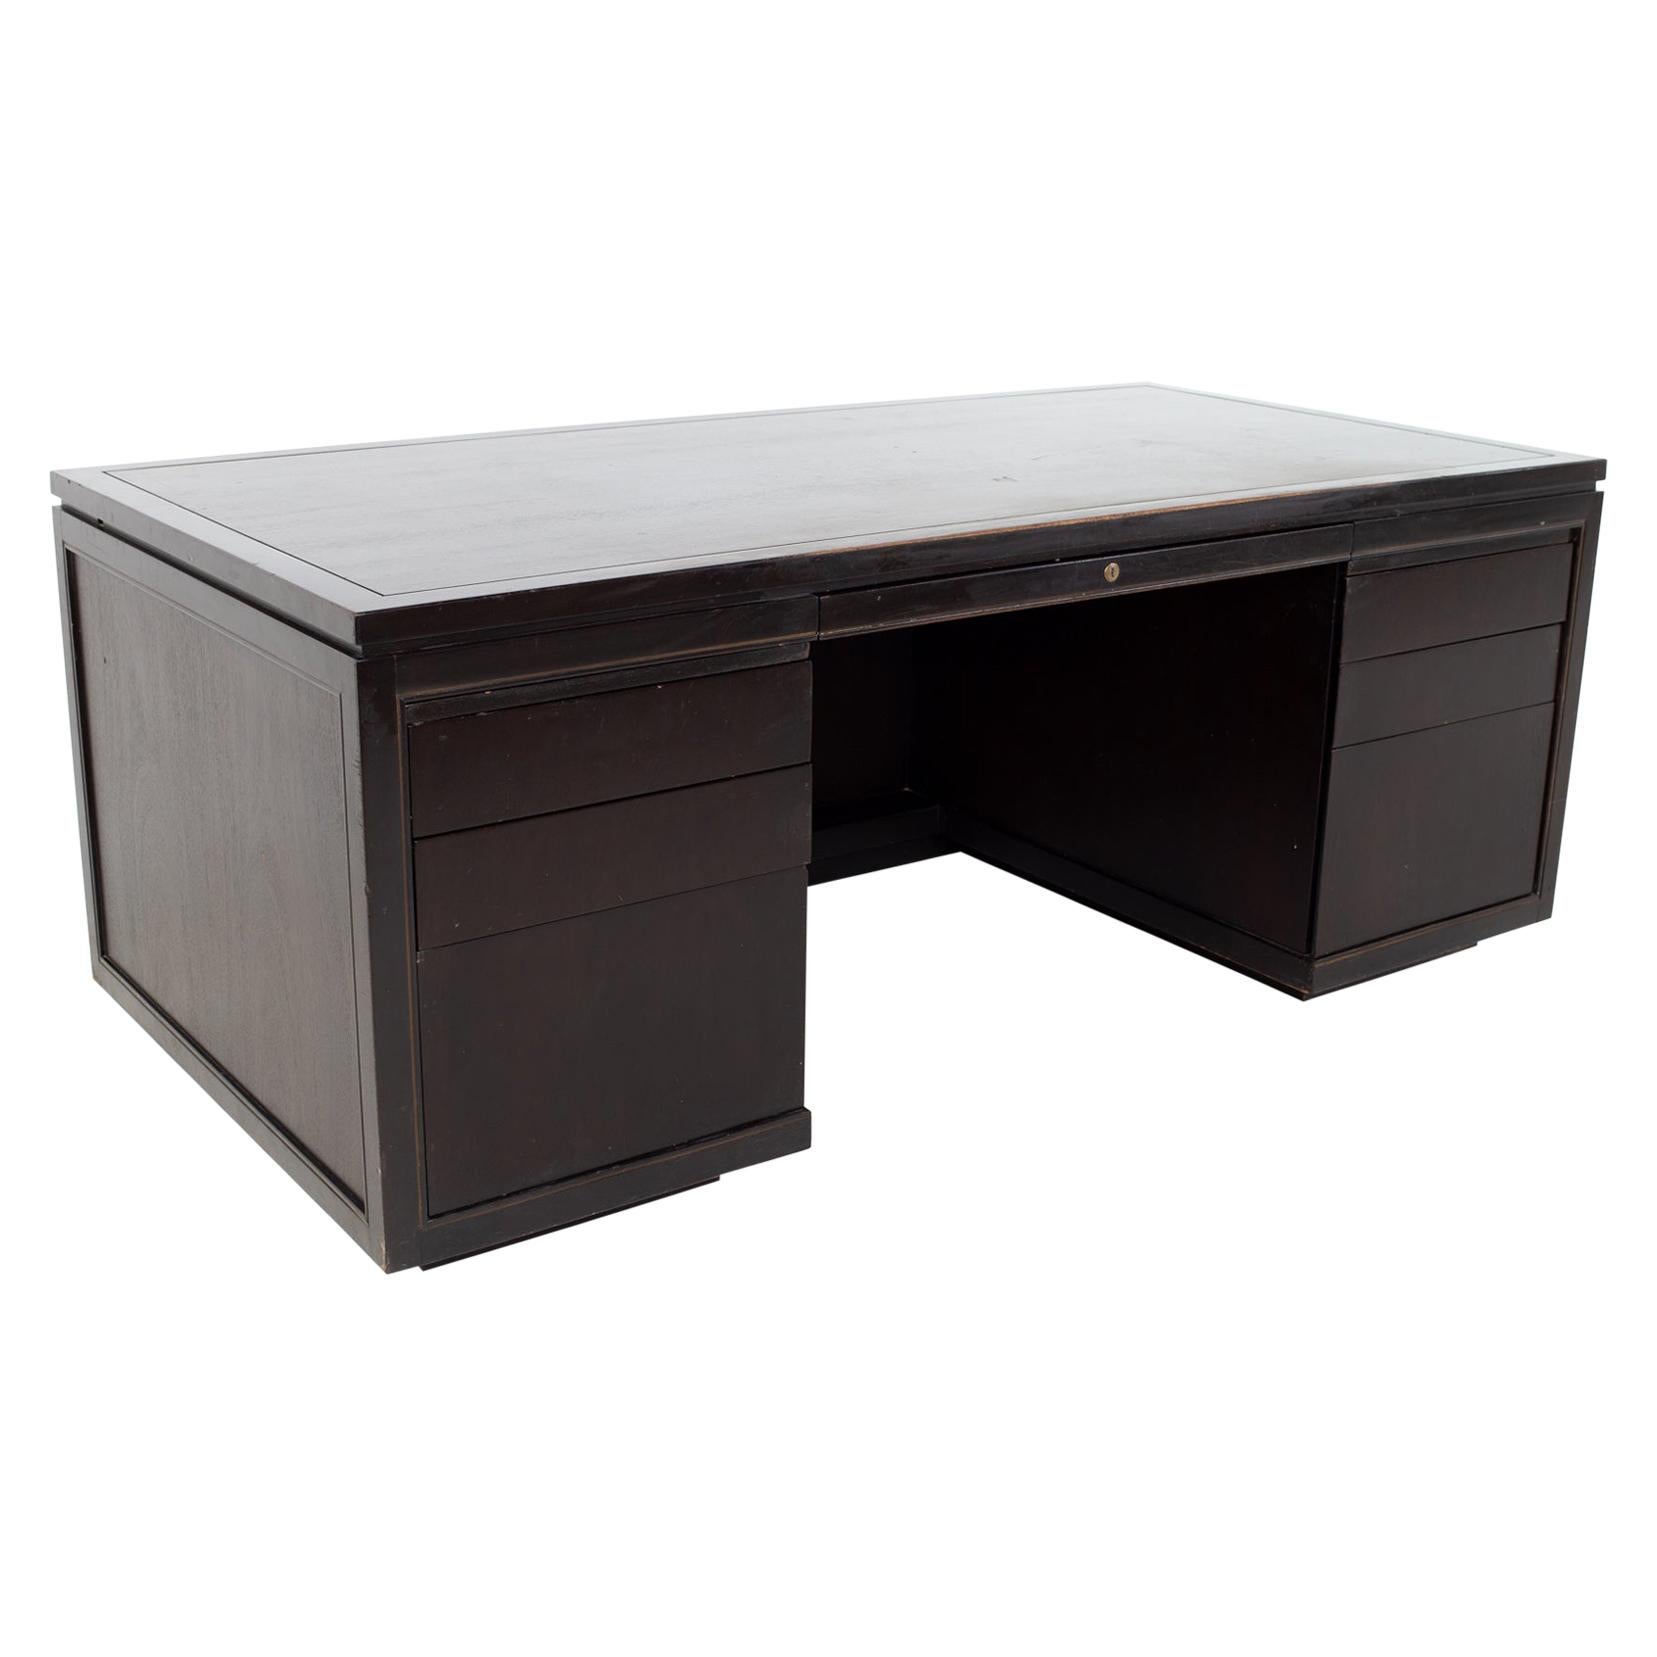 Dunbar Contract Division Mid Century Executive Desk For Sale